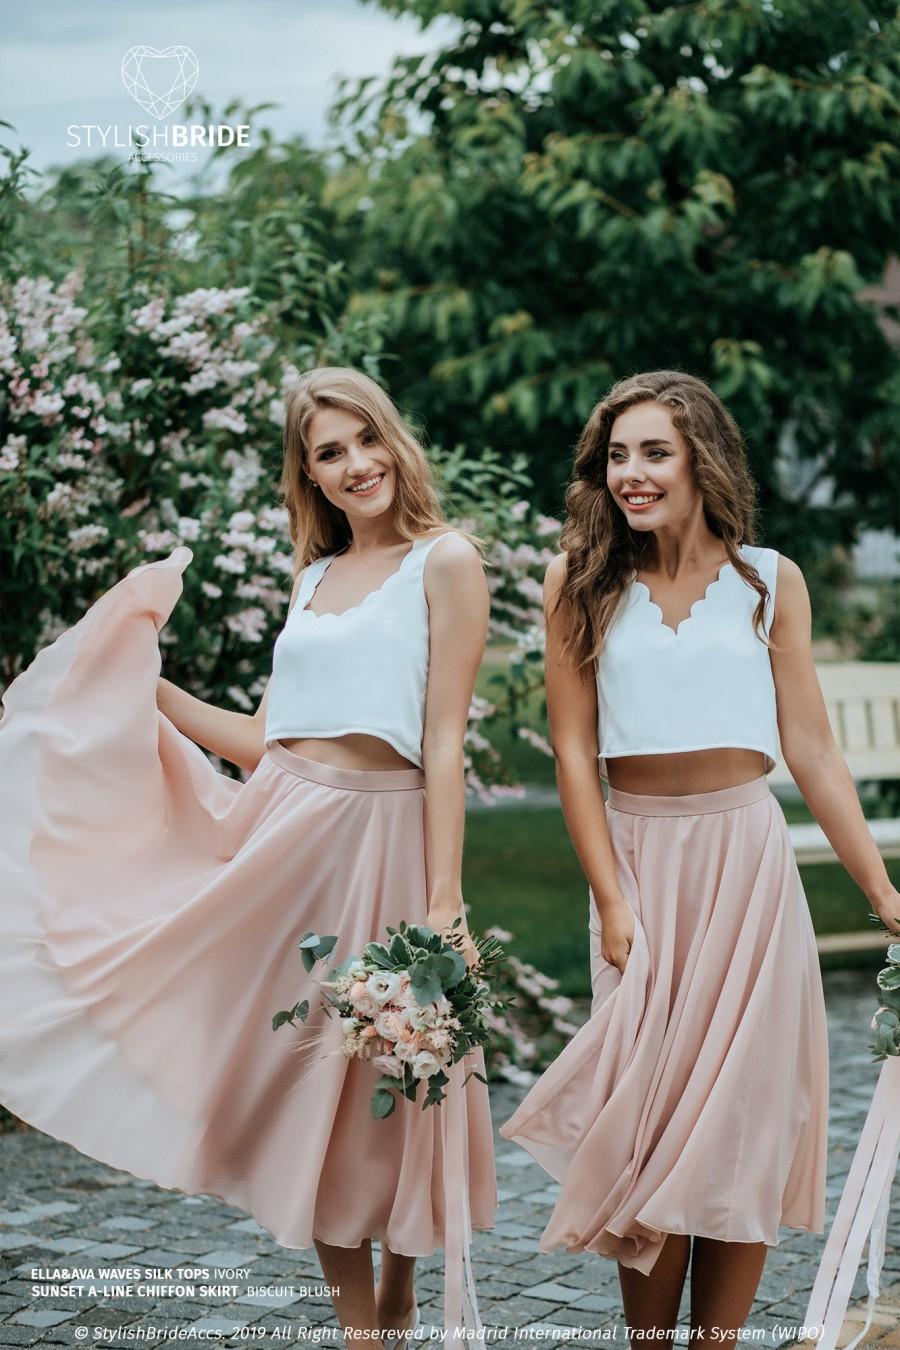 Hochzeit - Chiffon Knee/Tea Length "Sunset" Full Sun Flying A-line Bridesmaid Skirts and Waves Silk Tops available in Plus Sizes